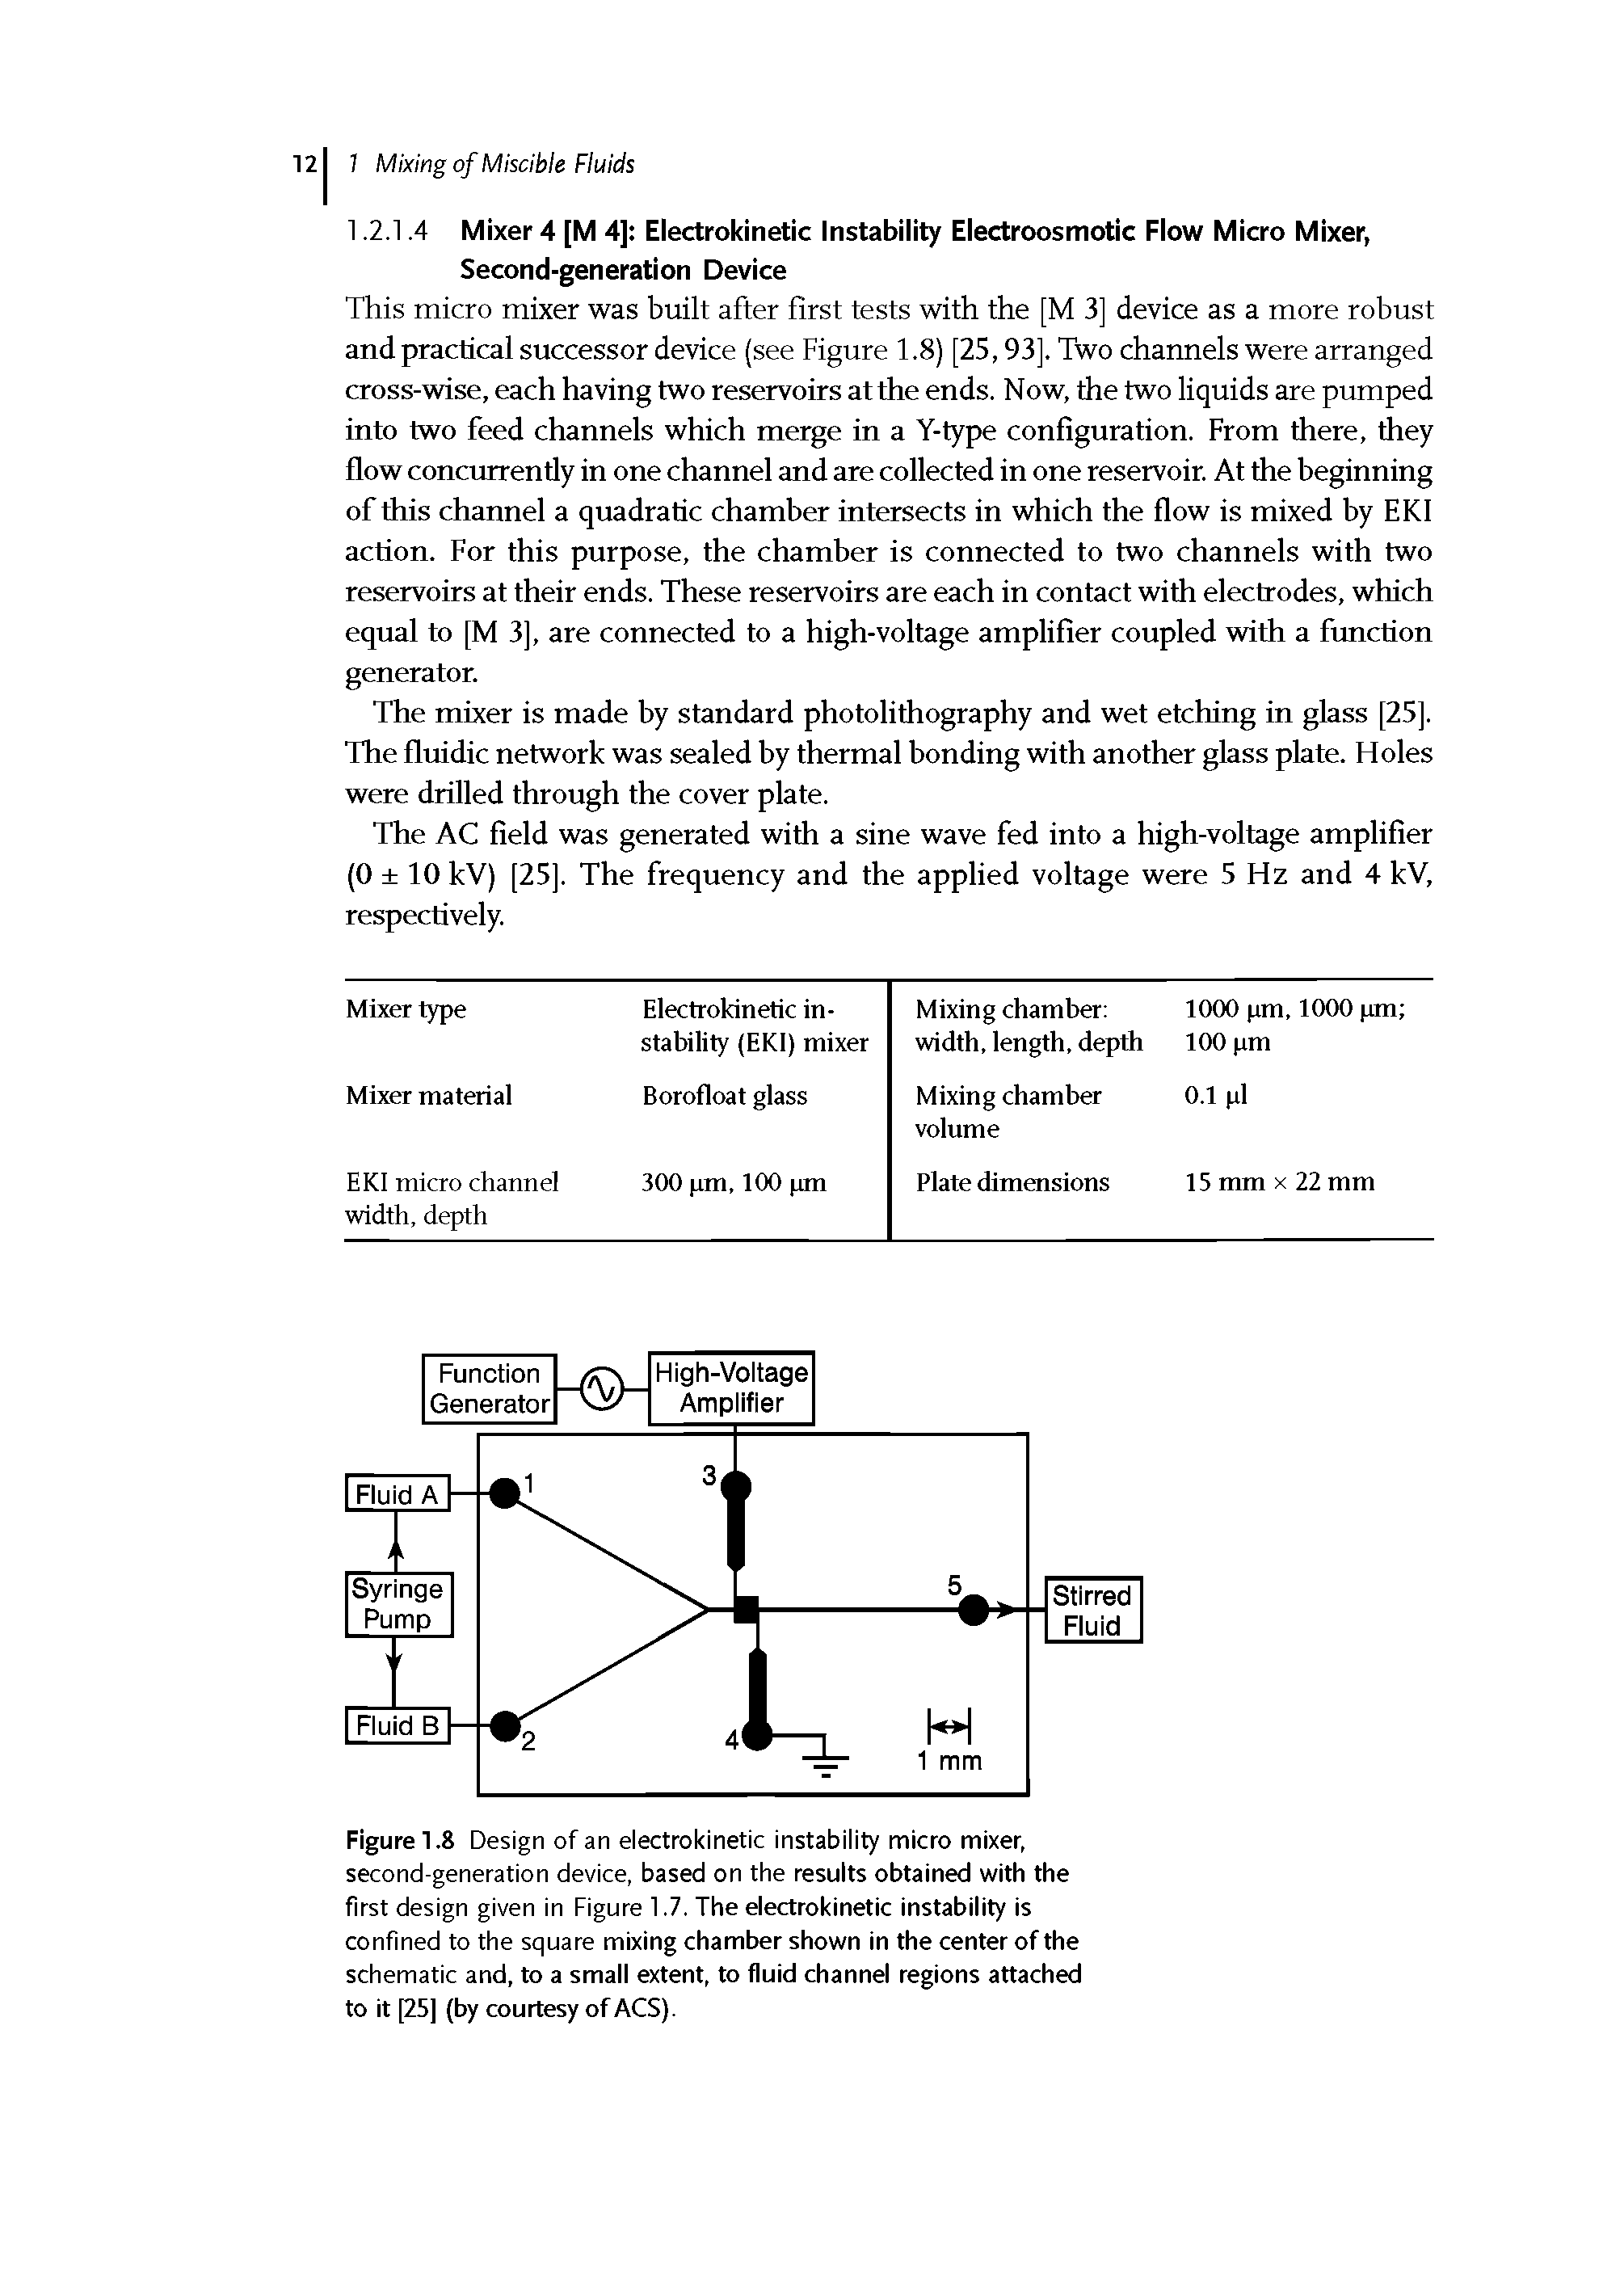 Figure 1.8 Design of an electrokinetic instability micro mixer, second-generation device, based on the results obtained with the first design given in Figure 1.7. The electrokinetic instability is confined to the square mixing chamber shown in the center of the schematic and, to a small extent, to fluid channel regions attached to it [25] (by courtesy of ACS).